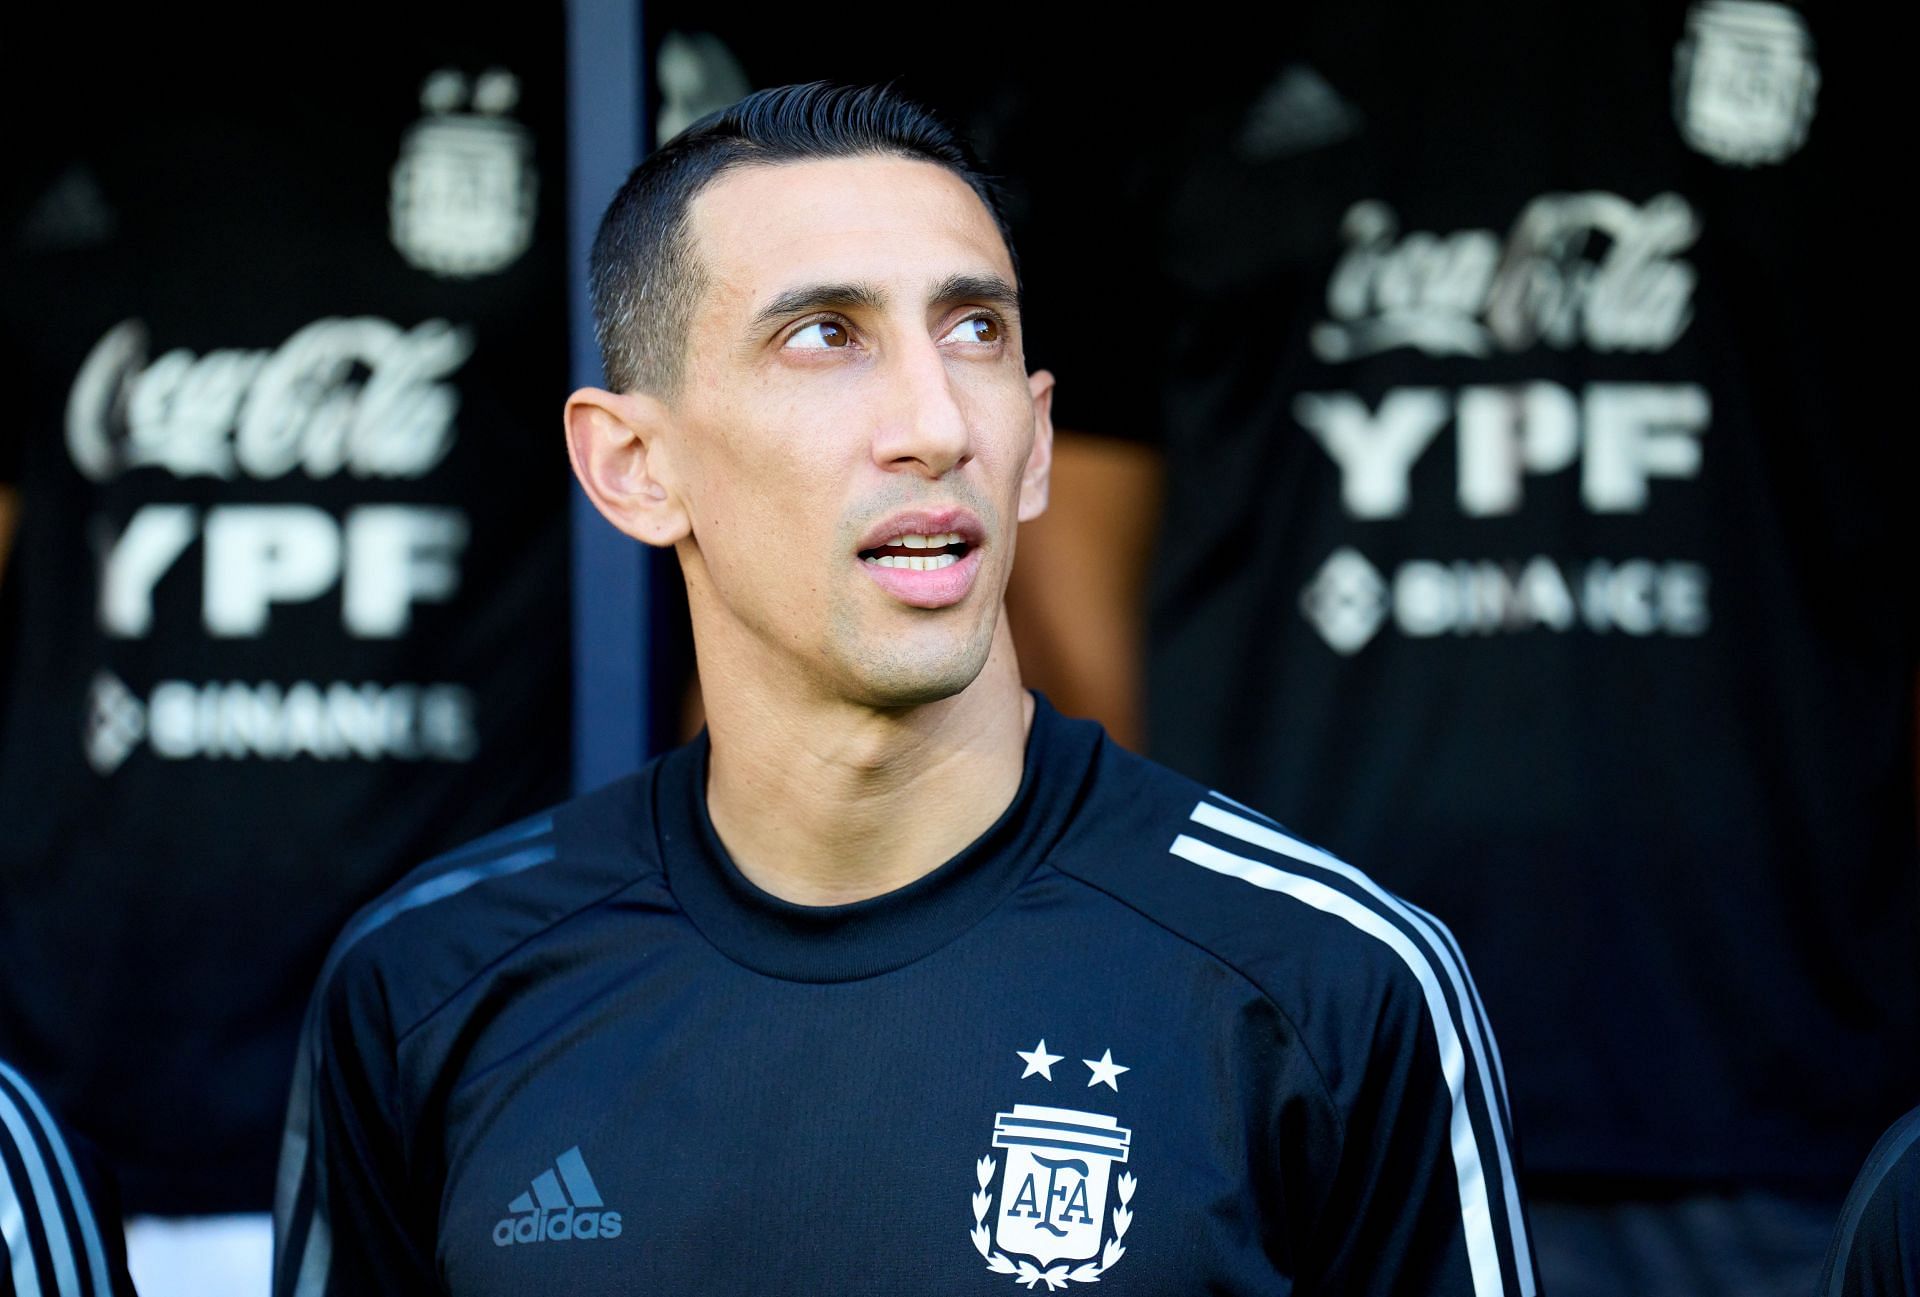 Angel Di Maria moved to Turin this summer.